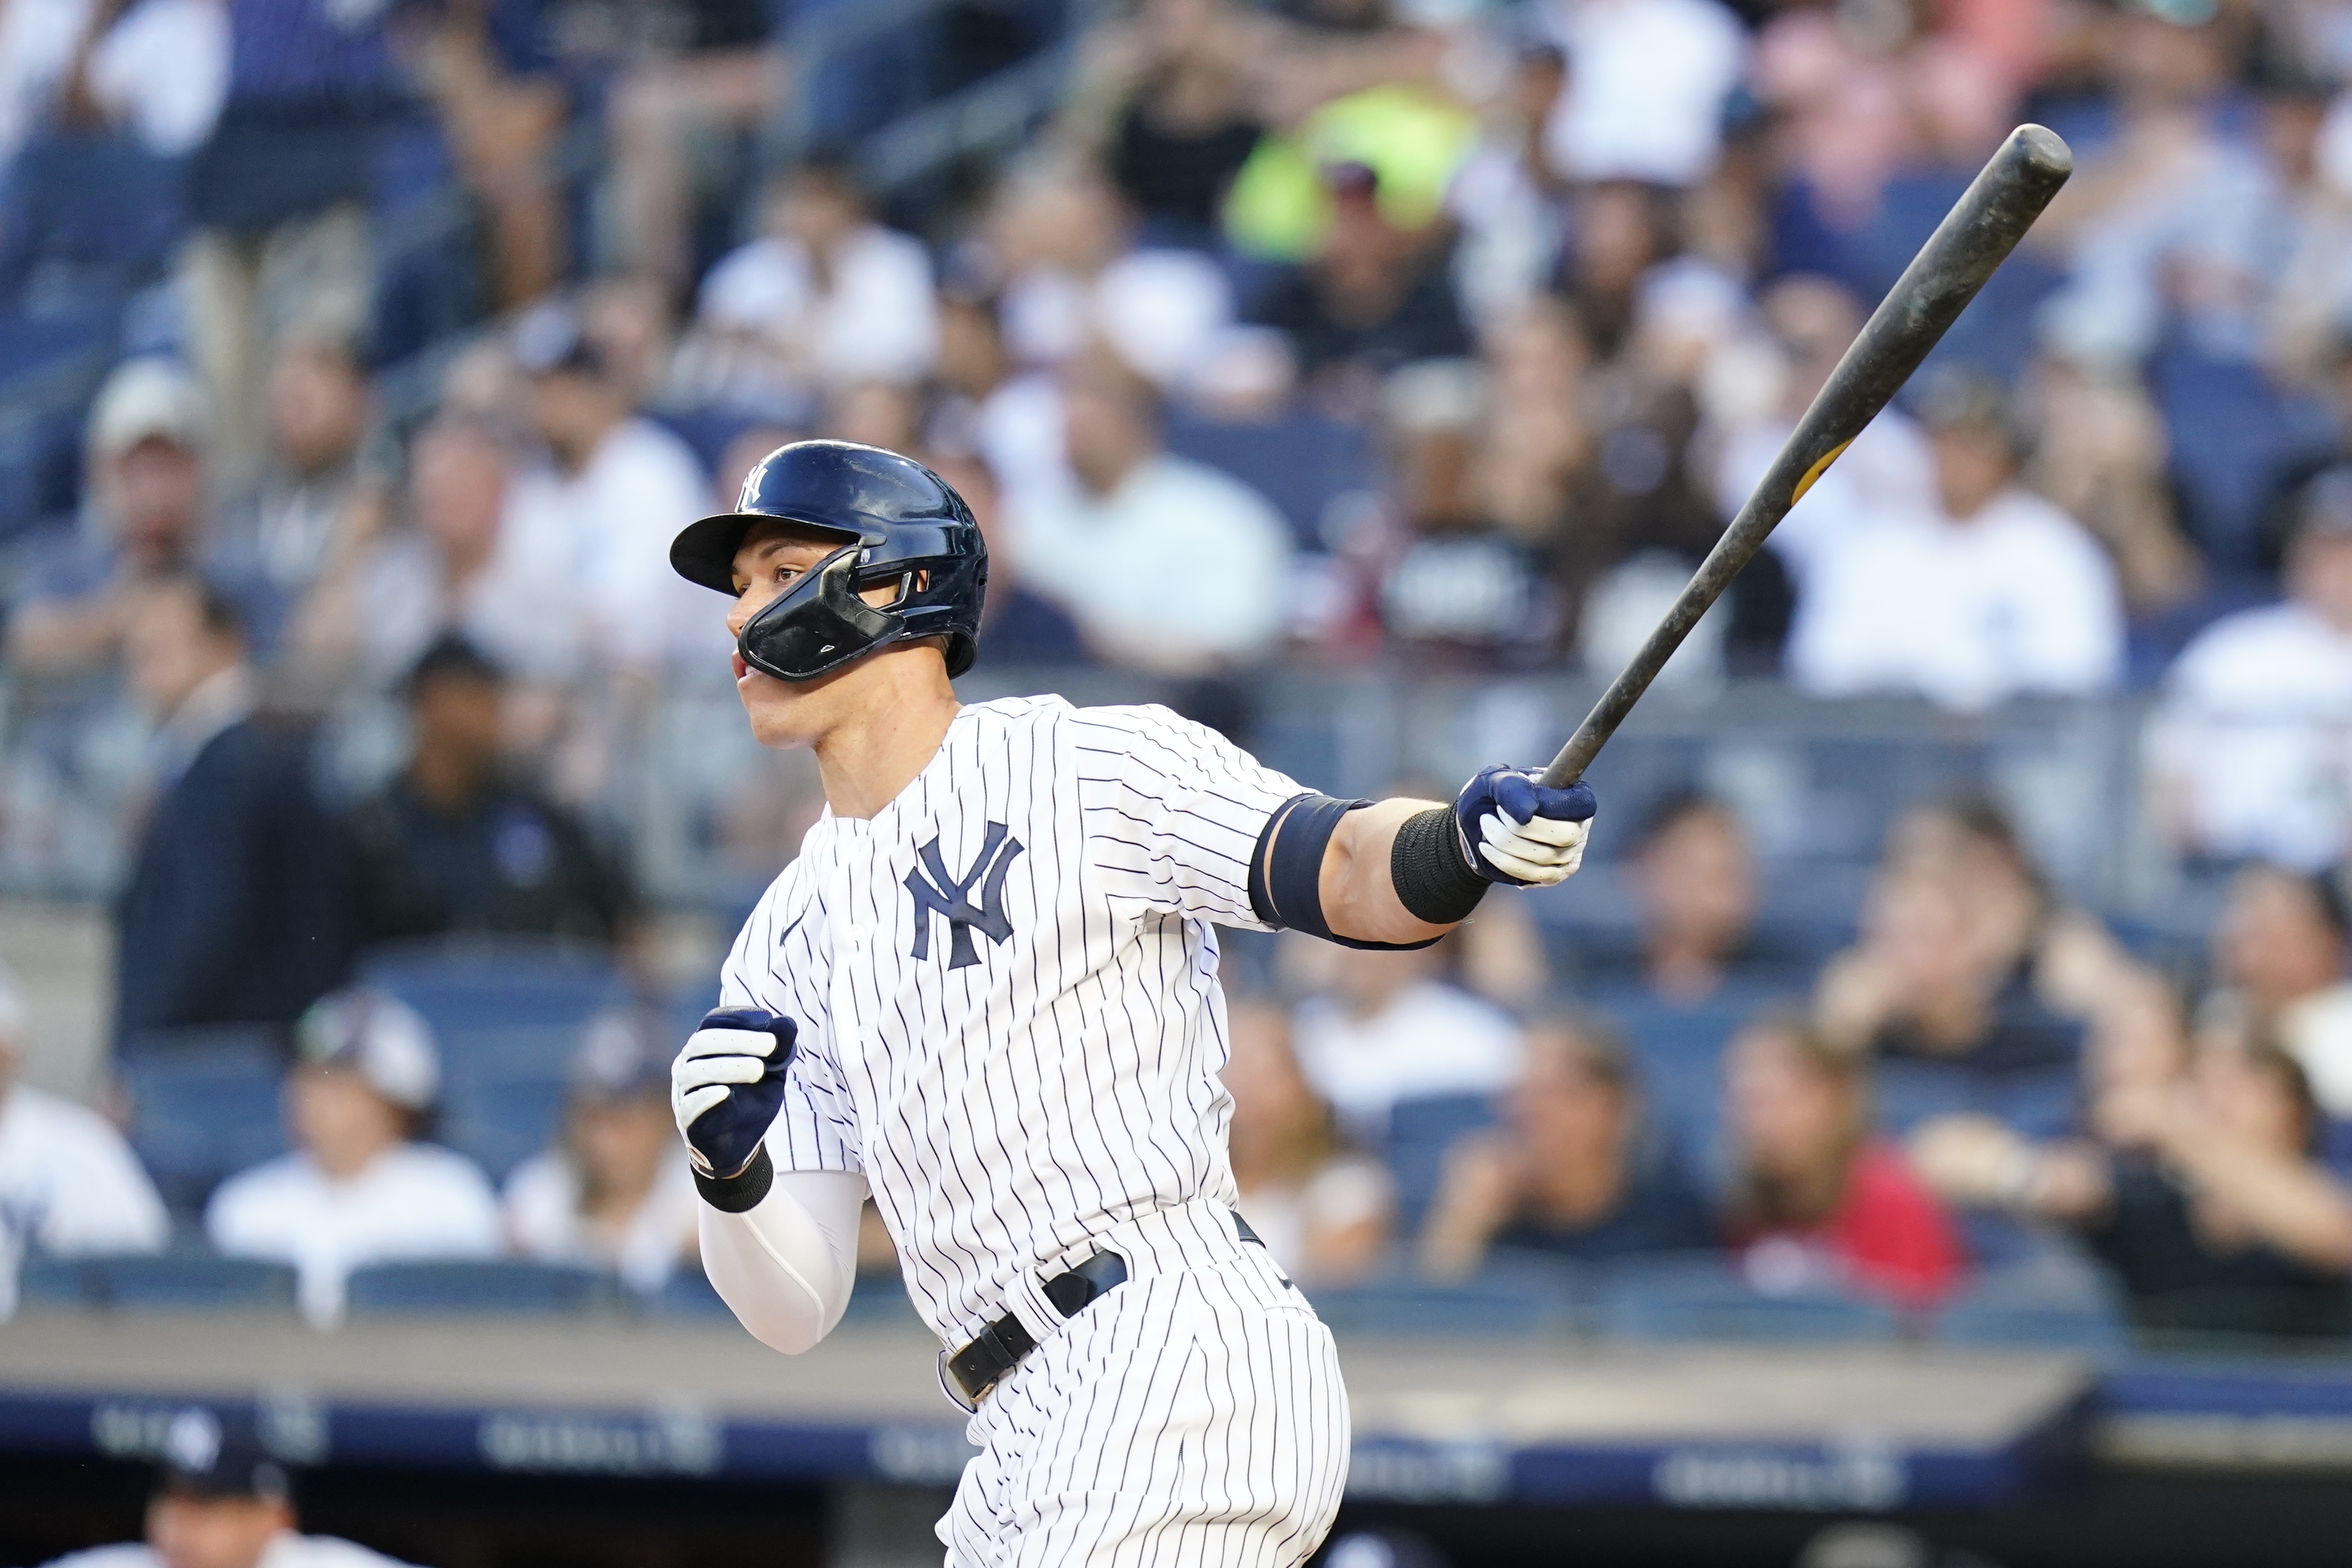 Yankees superstar Aaron Judge matches absolutely bonkers Babe Ruth